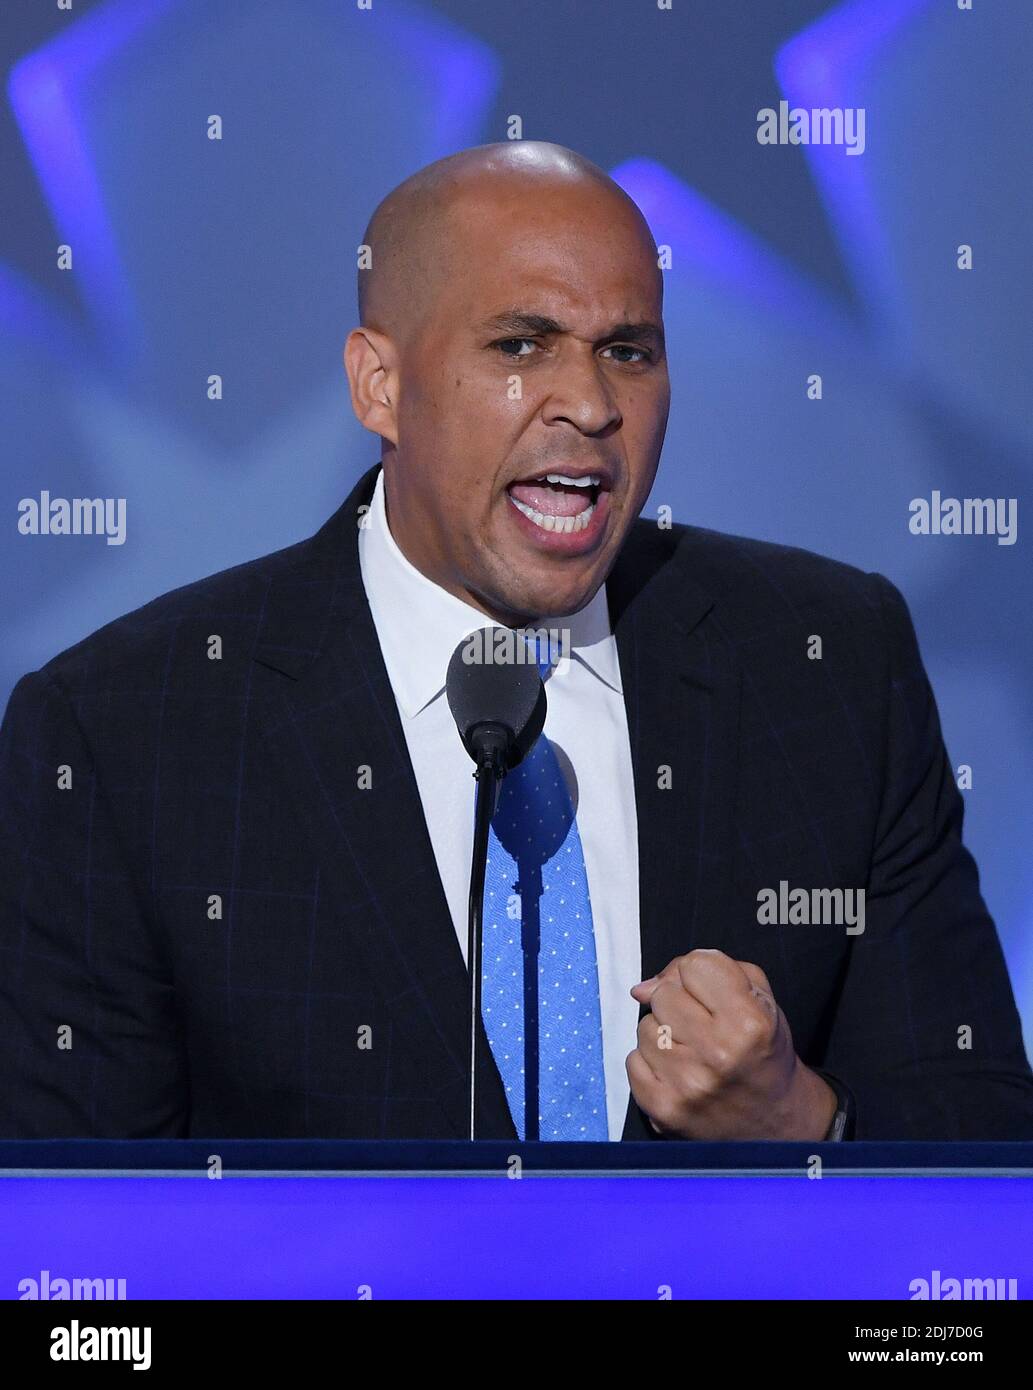 Senator from New-Jersey Cory Booker speaks during the first day of the Democratic National Convention on July 25, 2016 at the Wells Fargo Center, in Philadelphia, PA, USA. Photo by Olivier Douliery/ABACAPRESS.COM Stock Photo